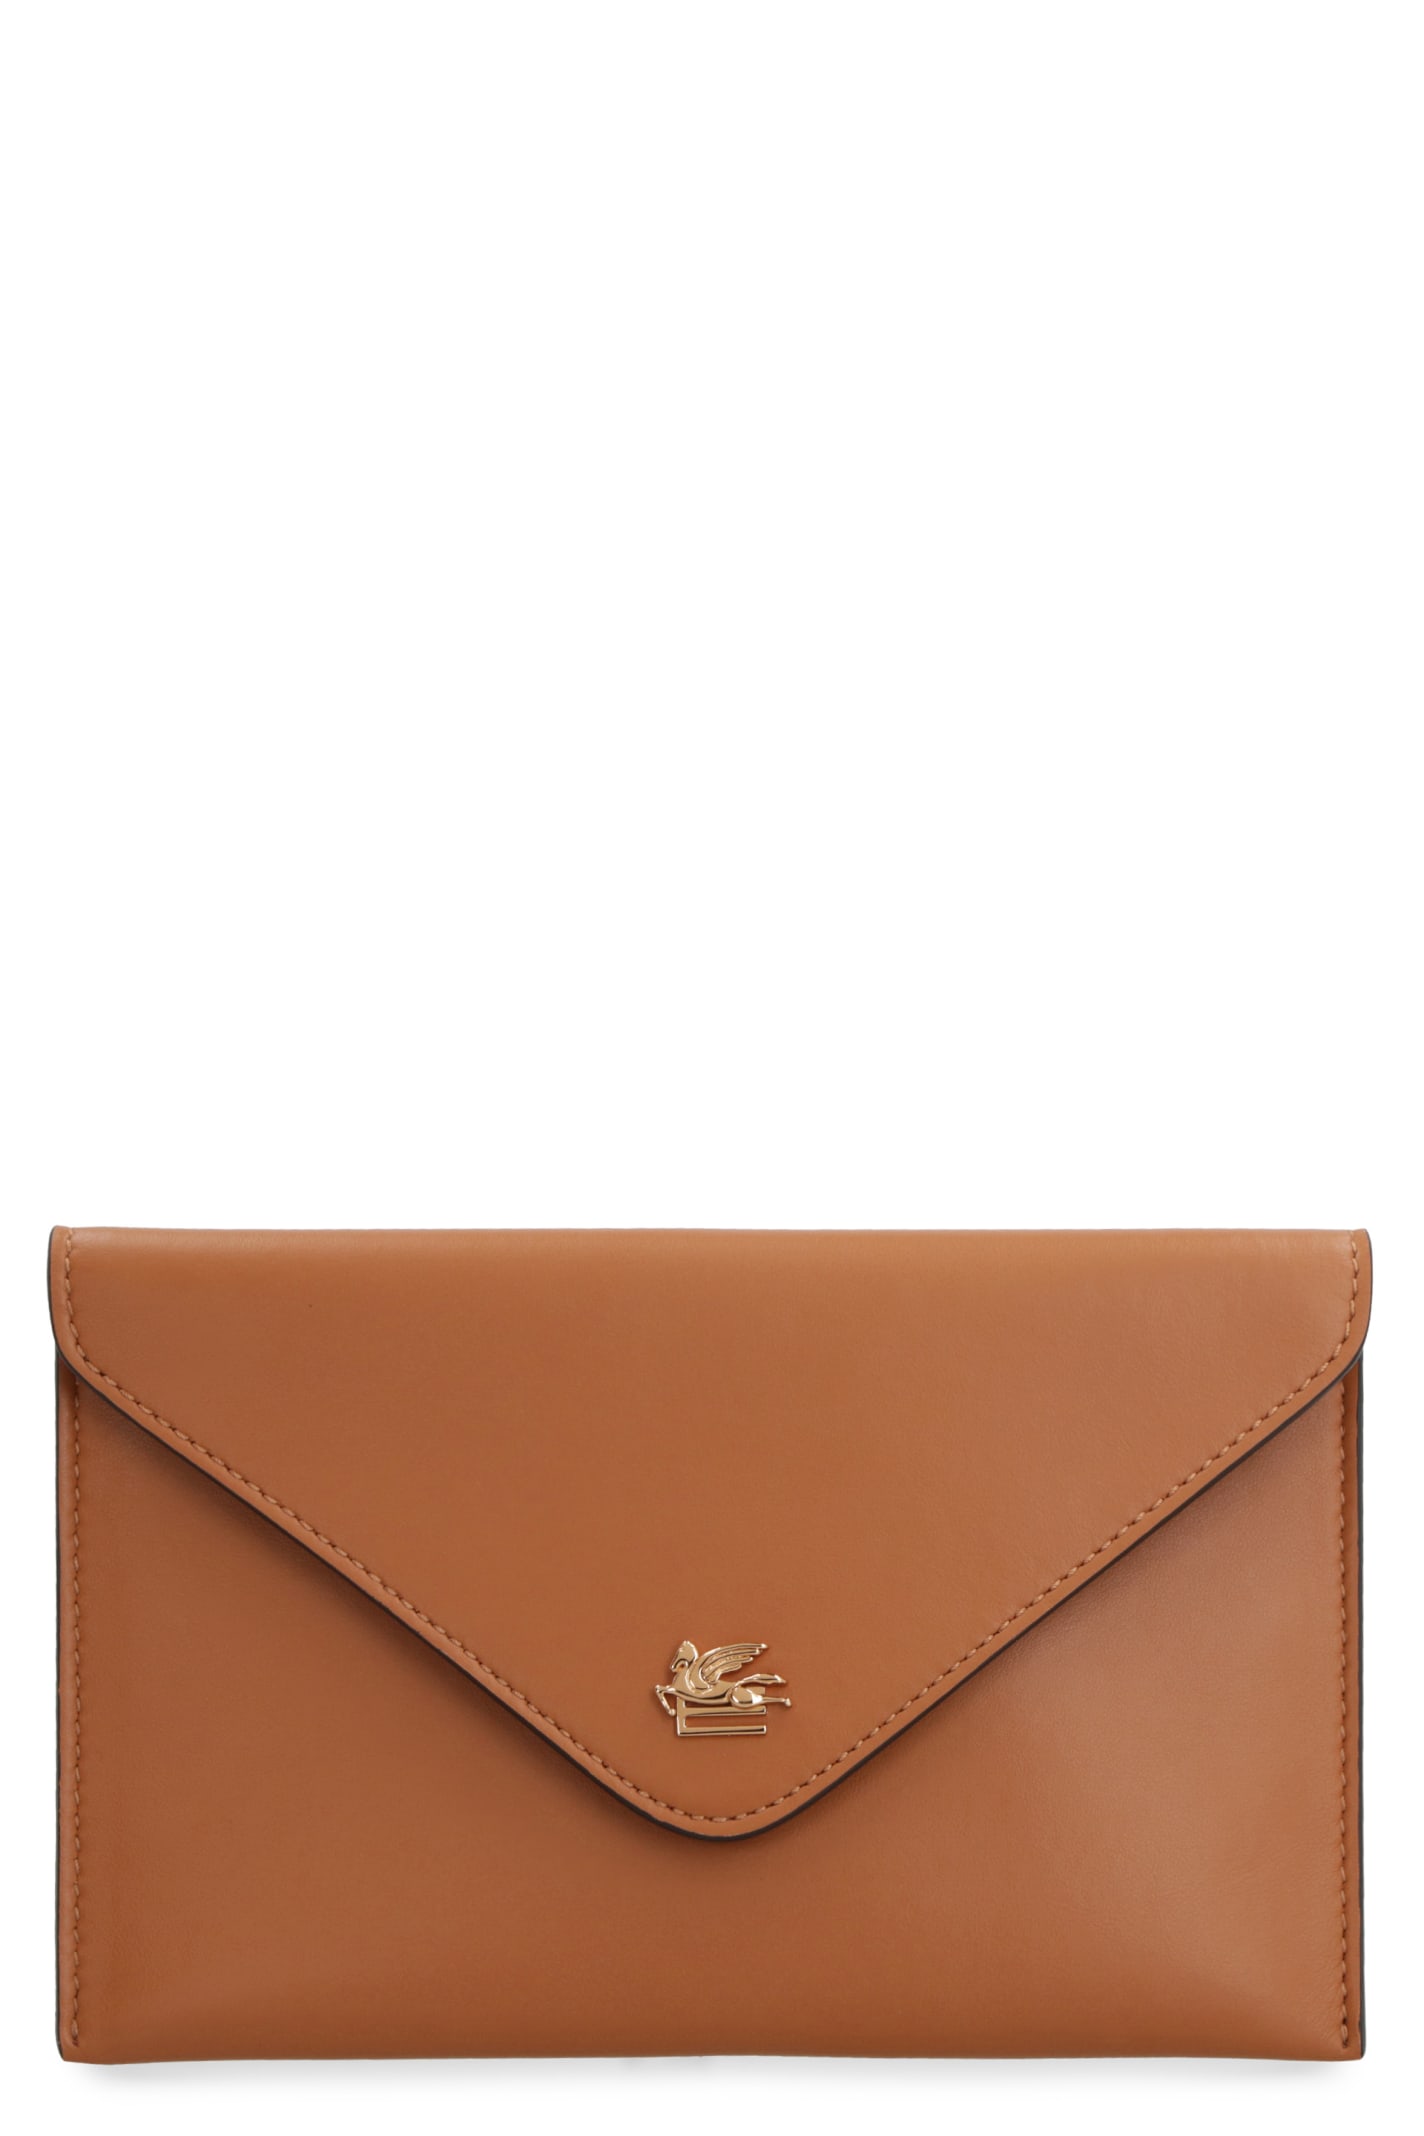 Etro Leather Flat Pouch